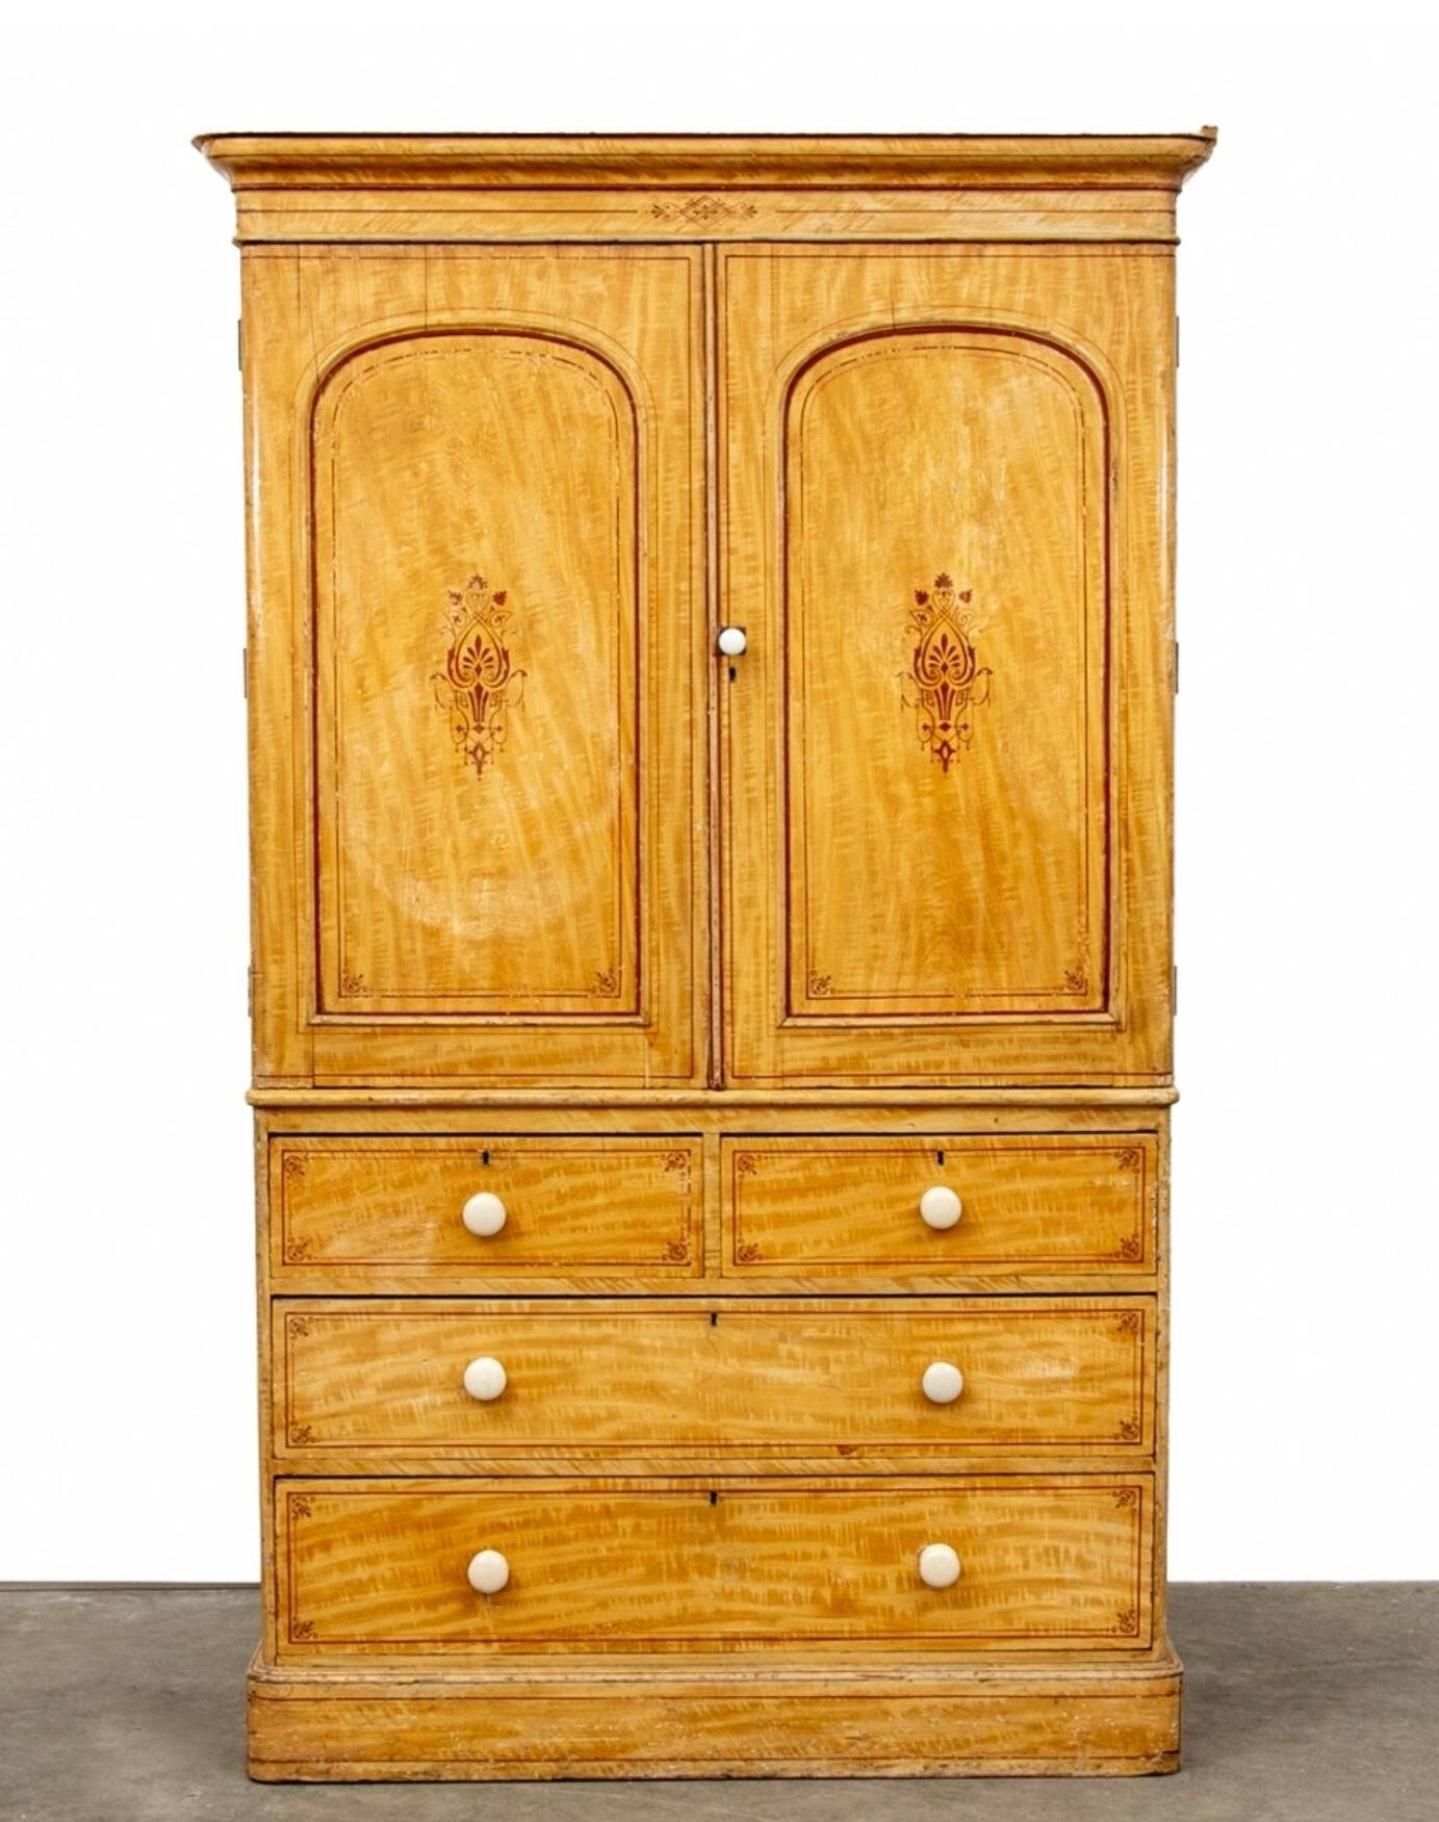 A most impressive large scale refined English country house faux painted pine satin birch linen press armoire (or housekeeper’s cupboard) by Gainsford & Company, London, England. 

Hand-crafted in London in the early 19th / possibly late 18th